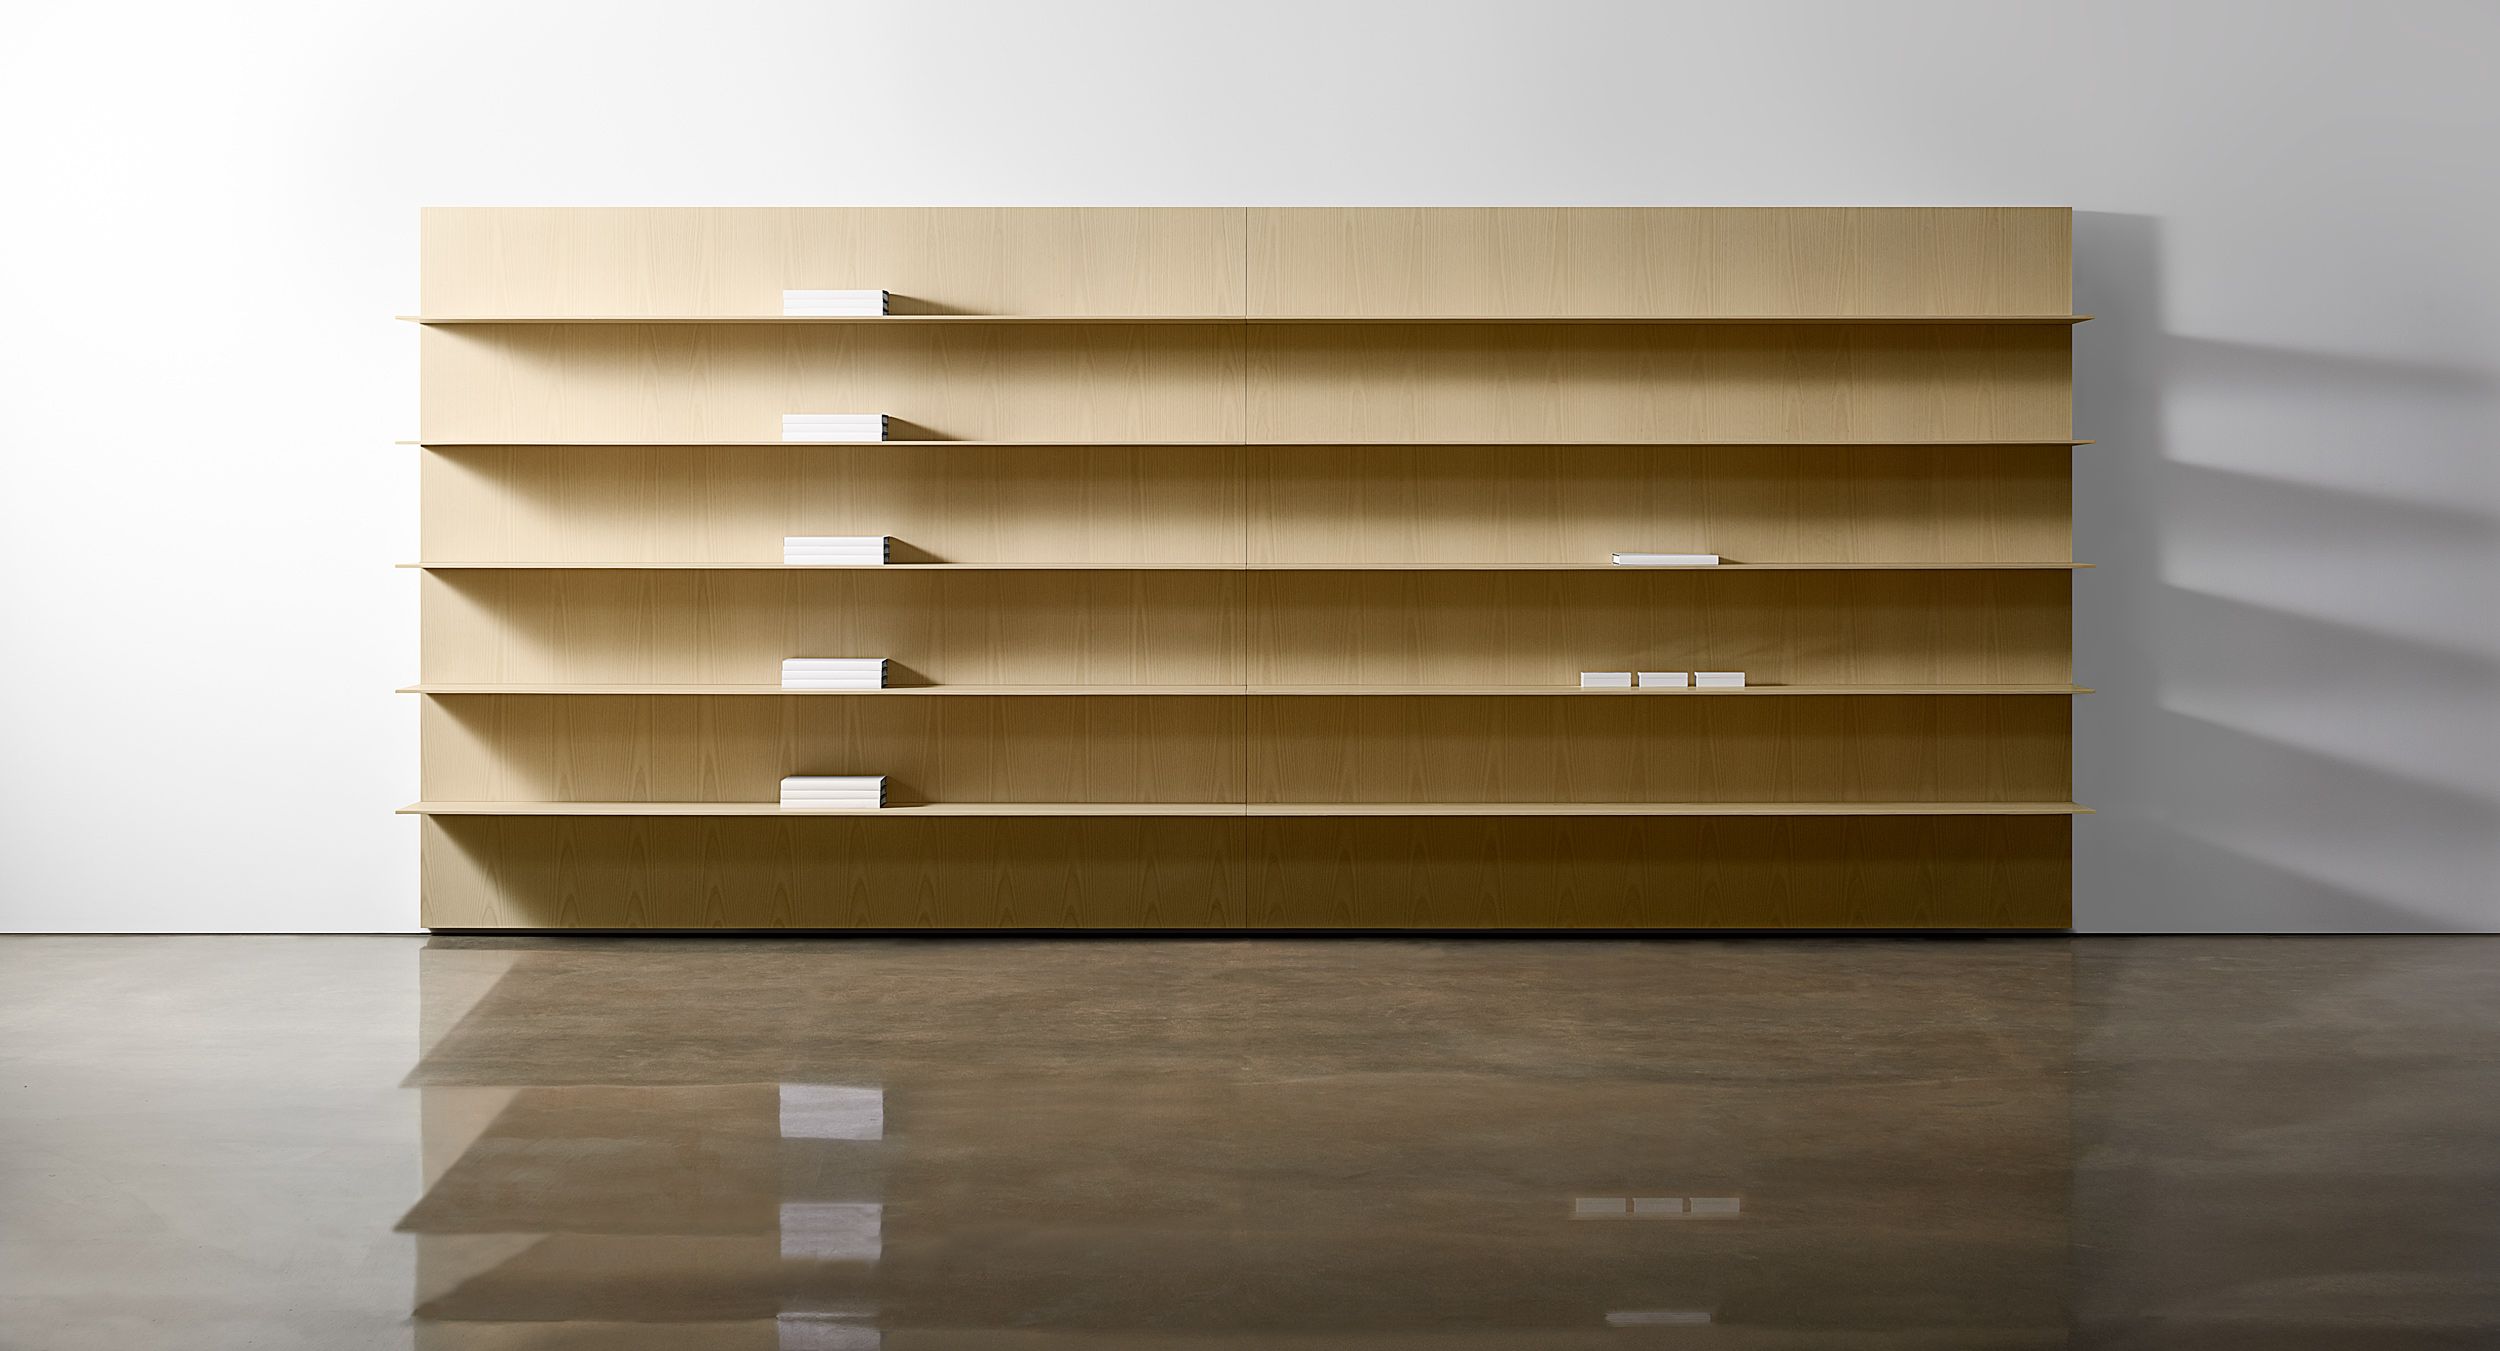 Defy gravity with patented thin wood shelving.
Patent No. US9955787B2